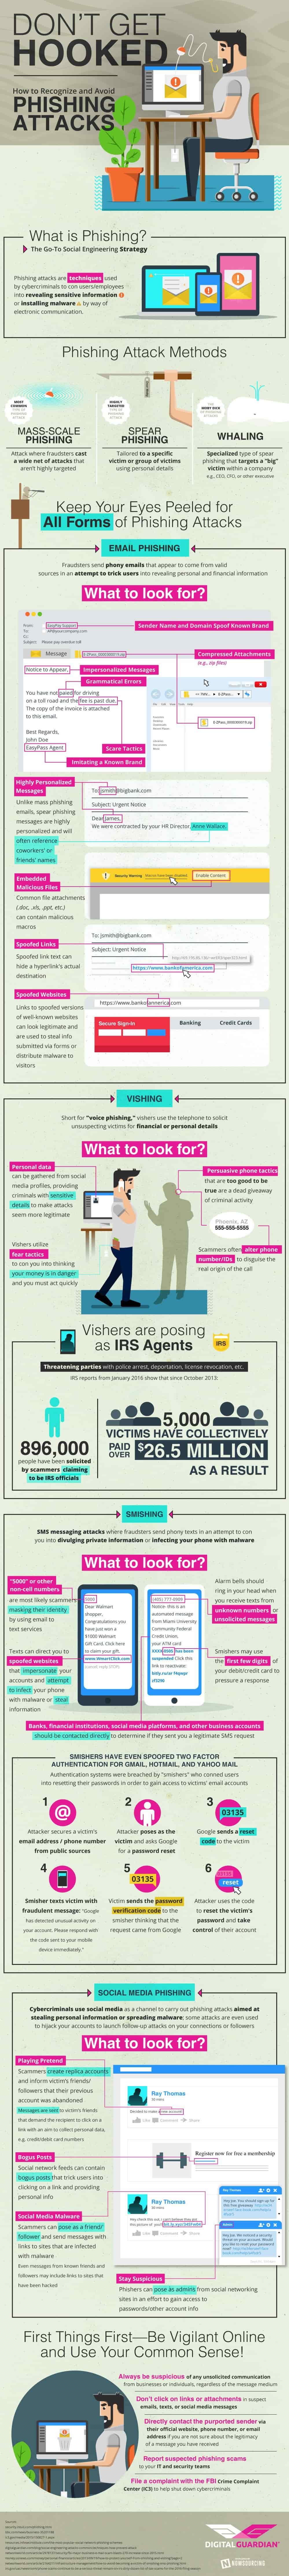 How to Recognize and Avoid Phishing Attacks Infographic